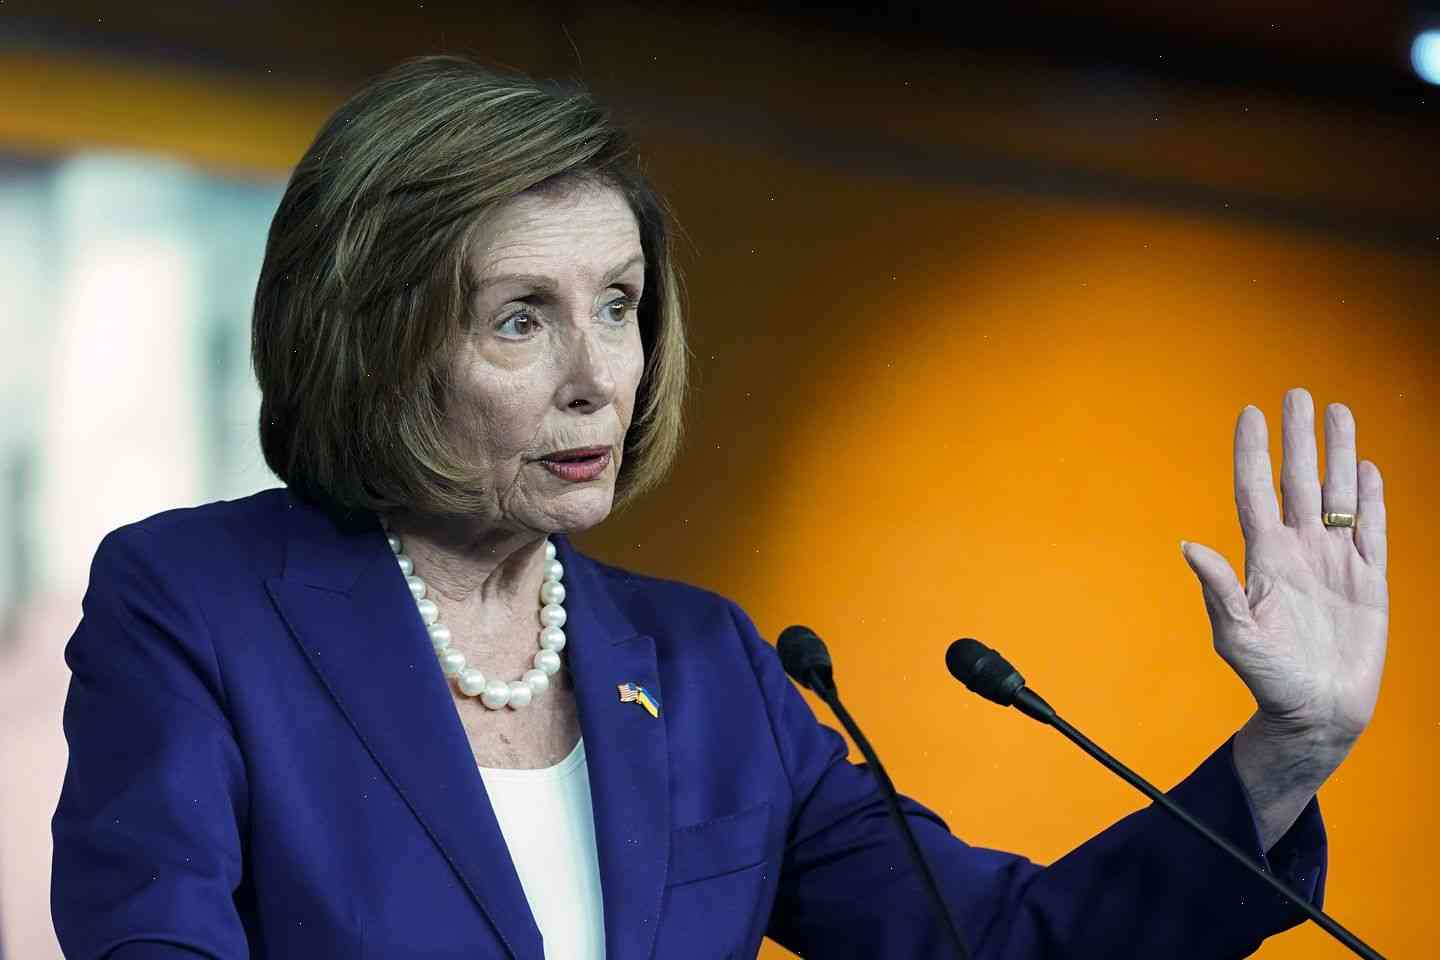 Nancy Pelosi says she won’t run for Speaker of the House after Democrats take back the chamber in 2020